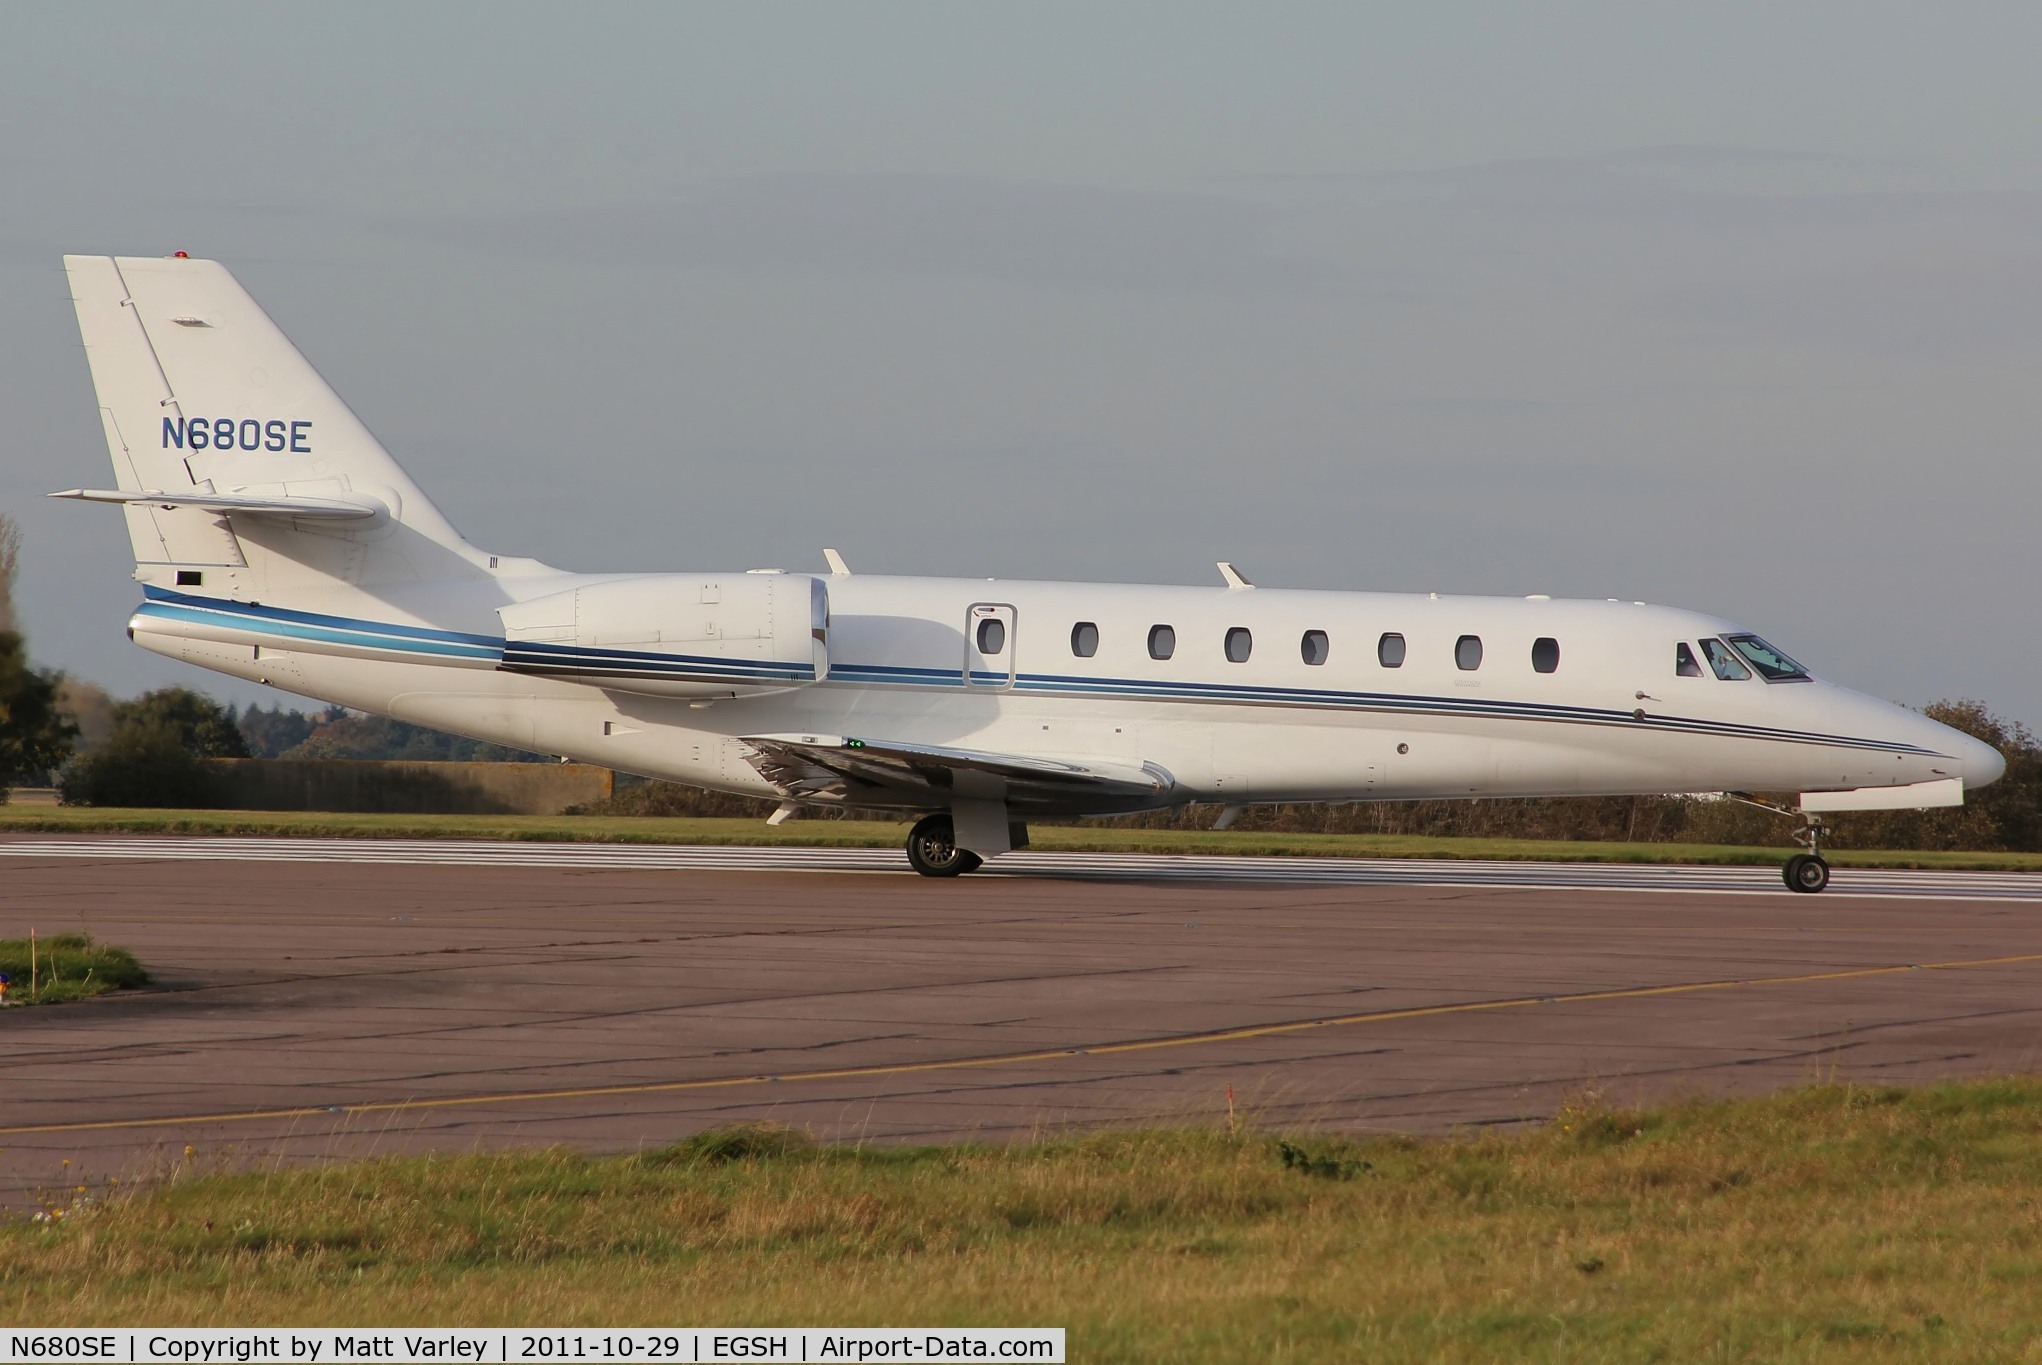 N680SE, 2006 Cessna 680 Citation Sovereign C/N 680-0078, About to depart EGSH on route to Antwerp.